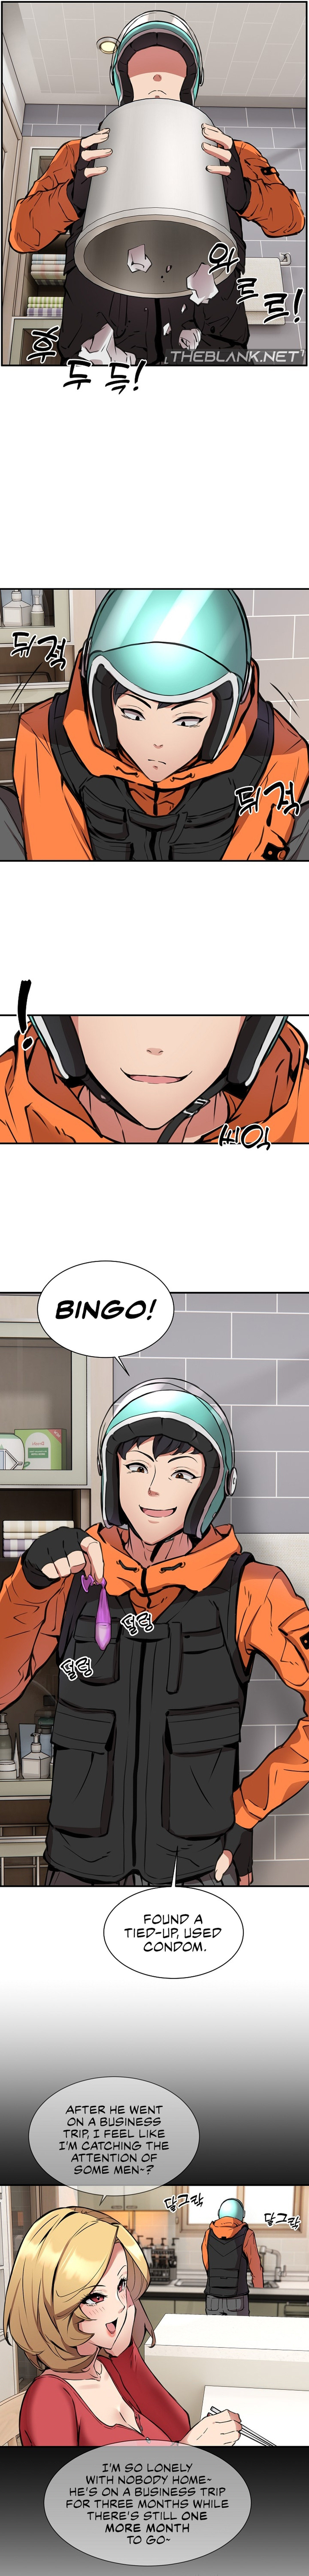 Driver in the New City - Chapter 1 Page 29